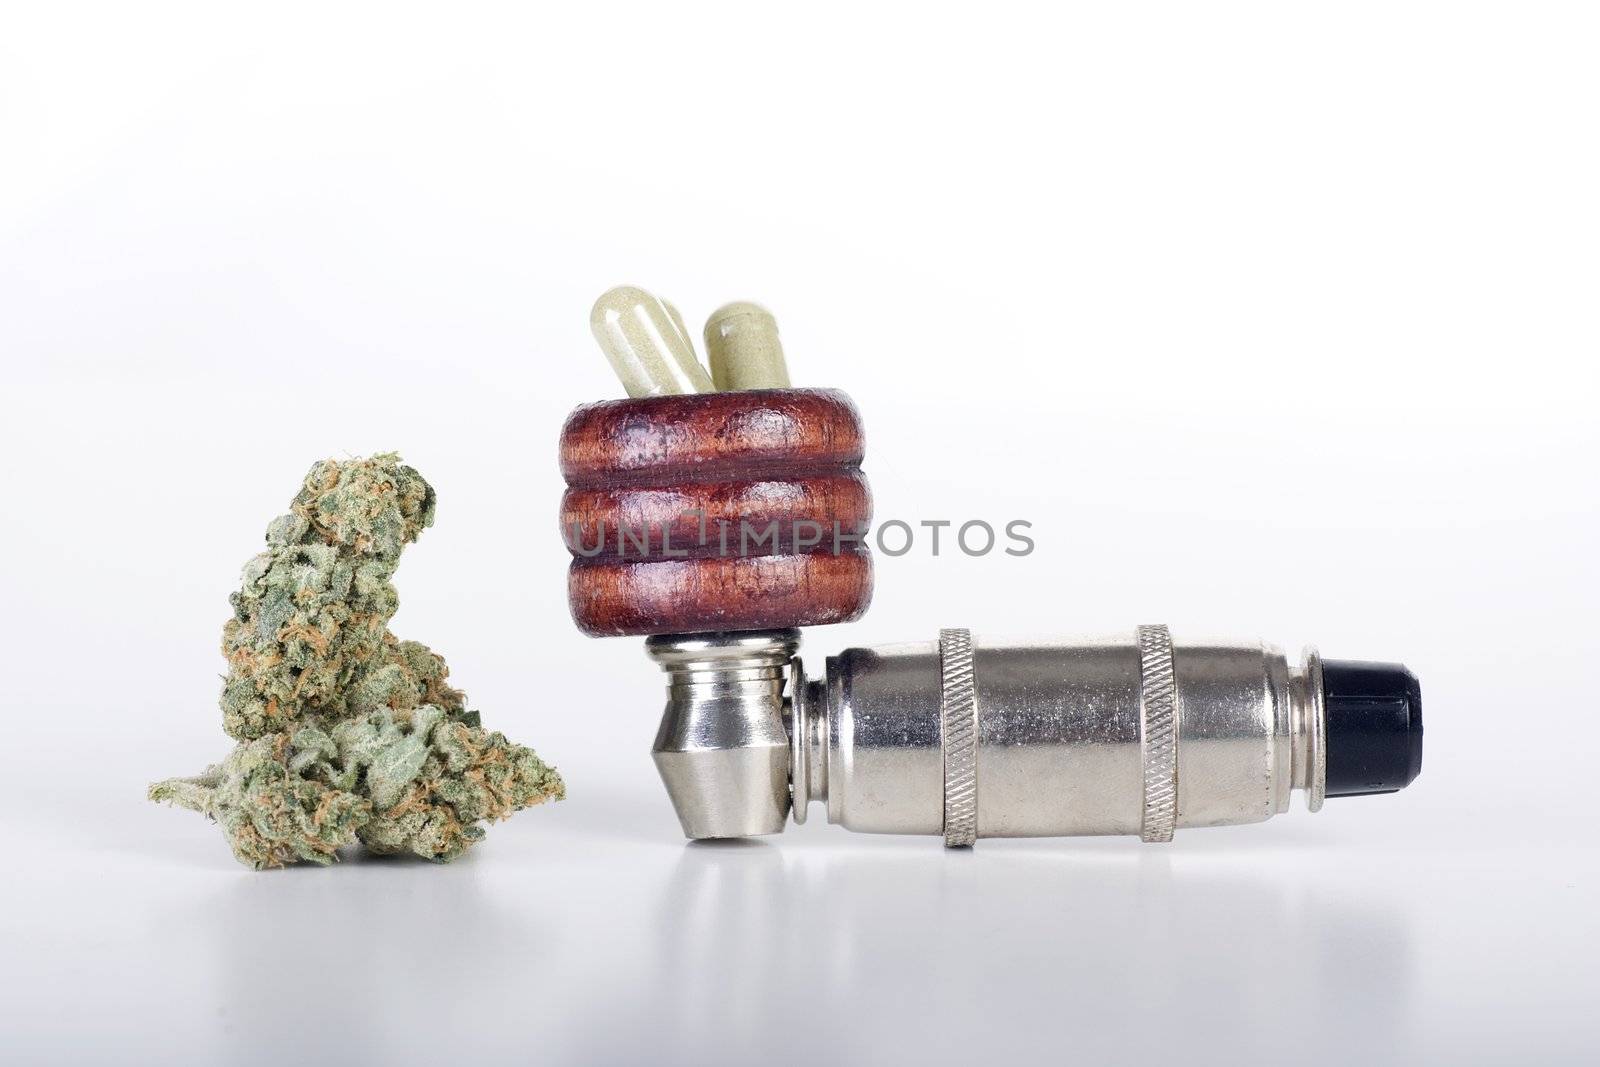 Bud of dried cannabis, pipe and pills.